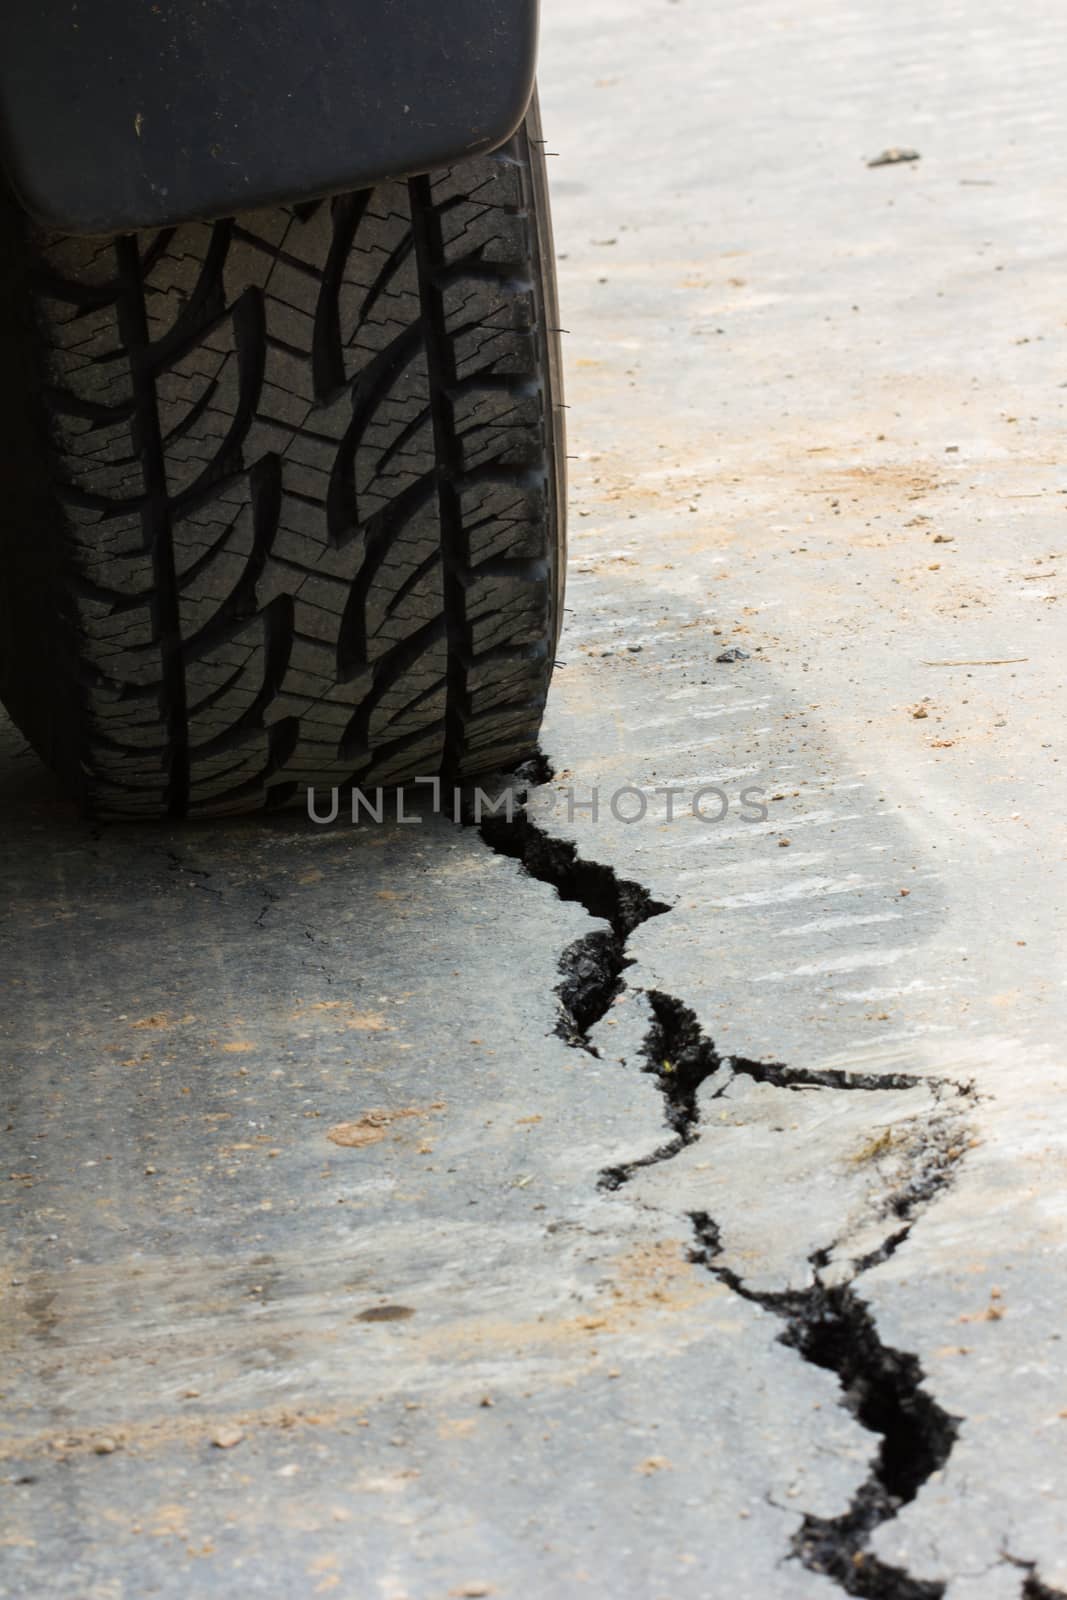 back view of tire tread and cracked asphalt by a3701027